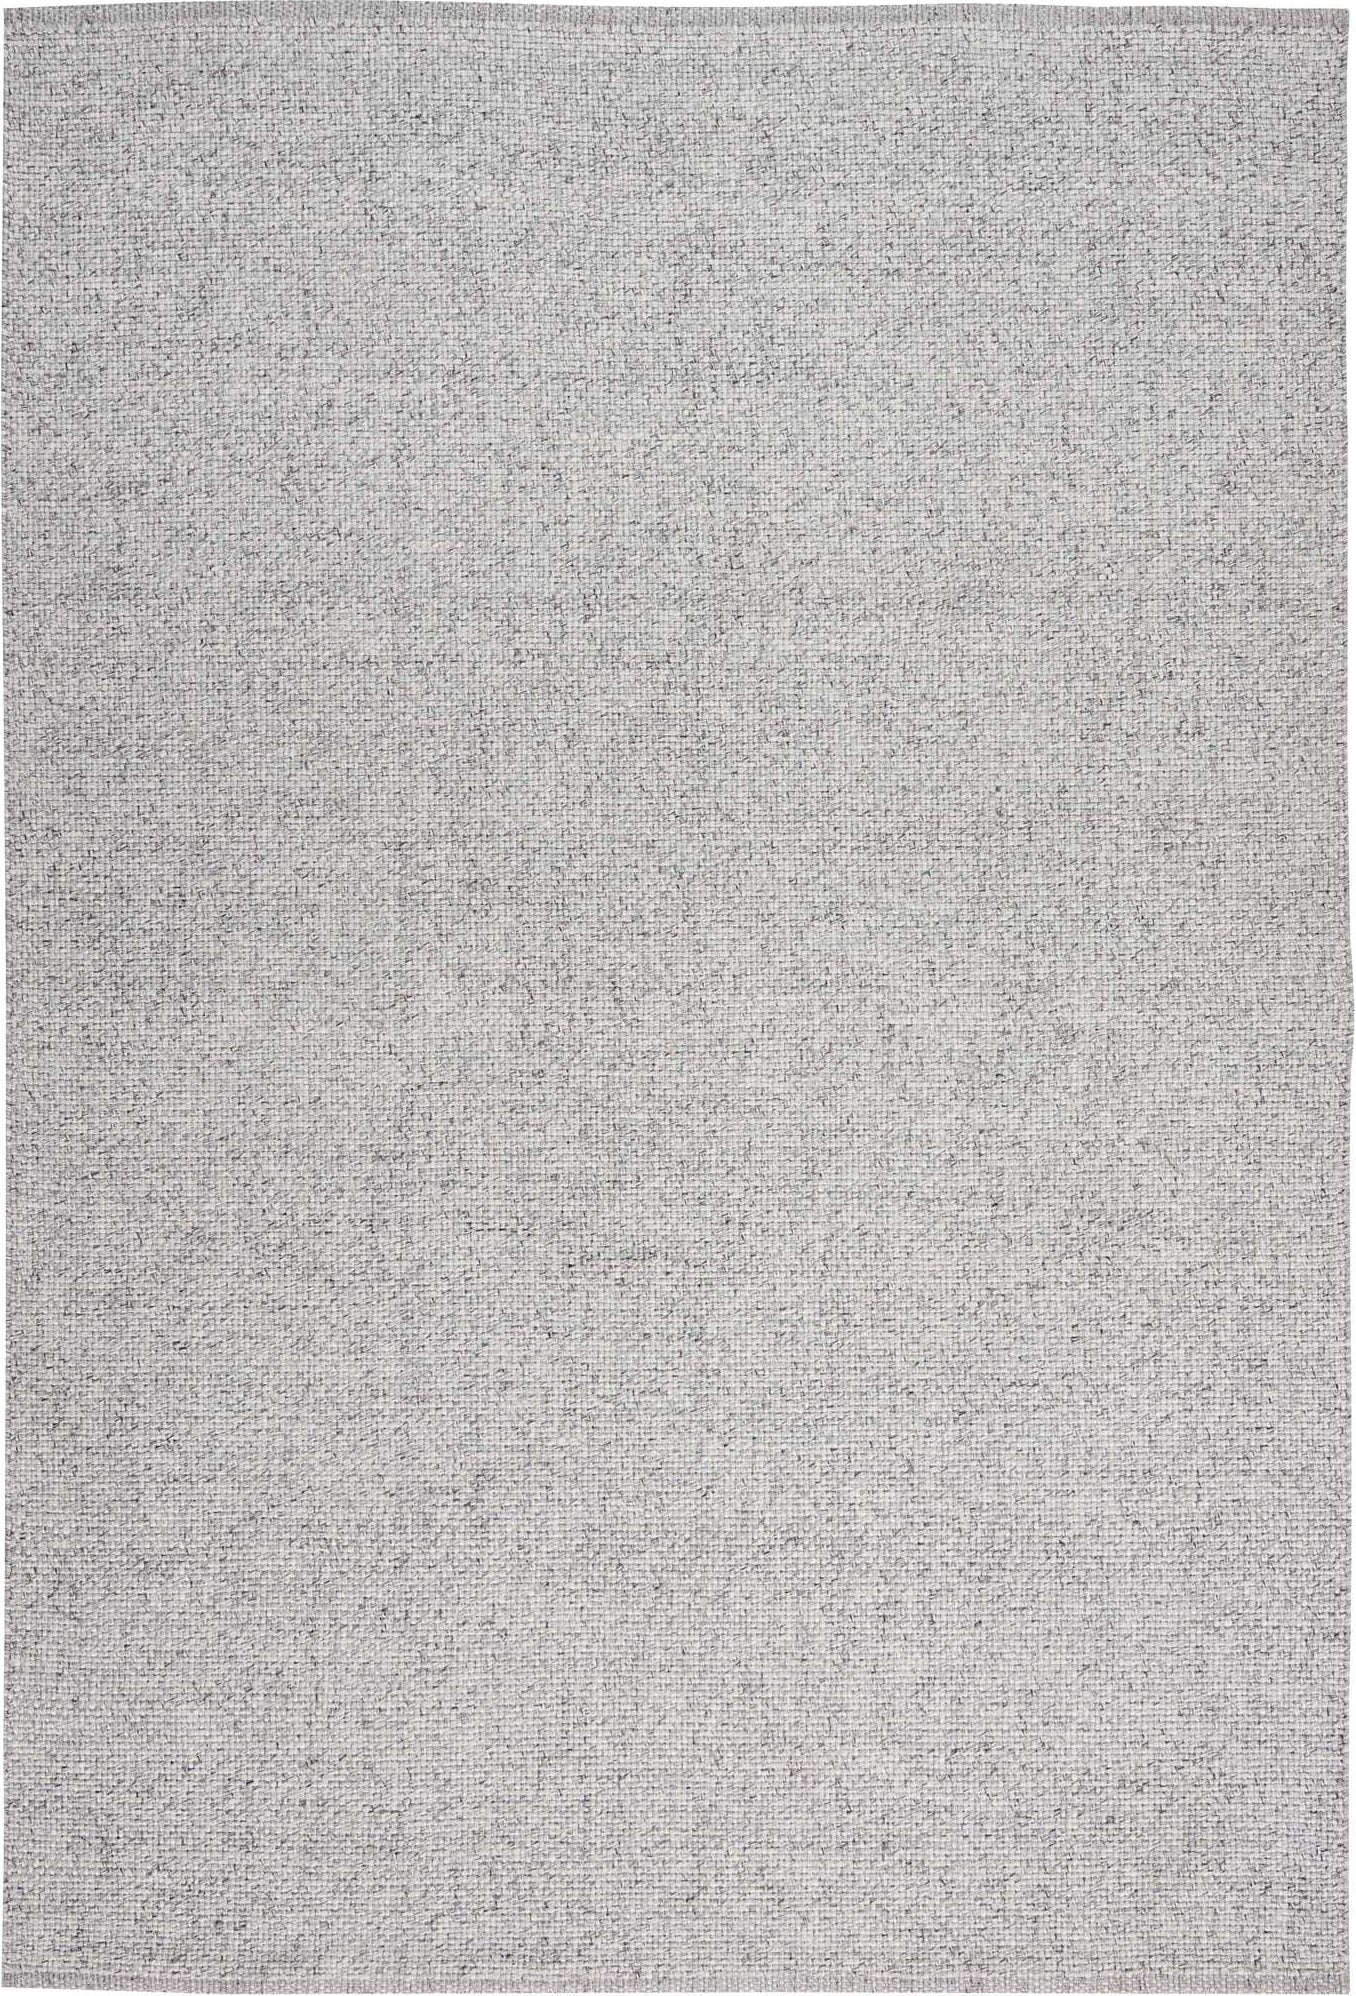 Calvin Klein Ck39 Tobiano TOB01 Silver Area Rug by HOME main image